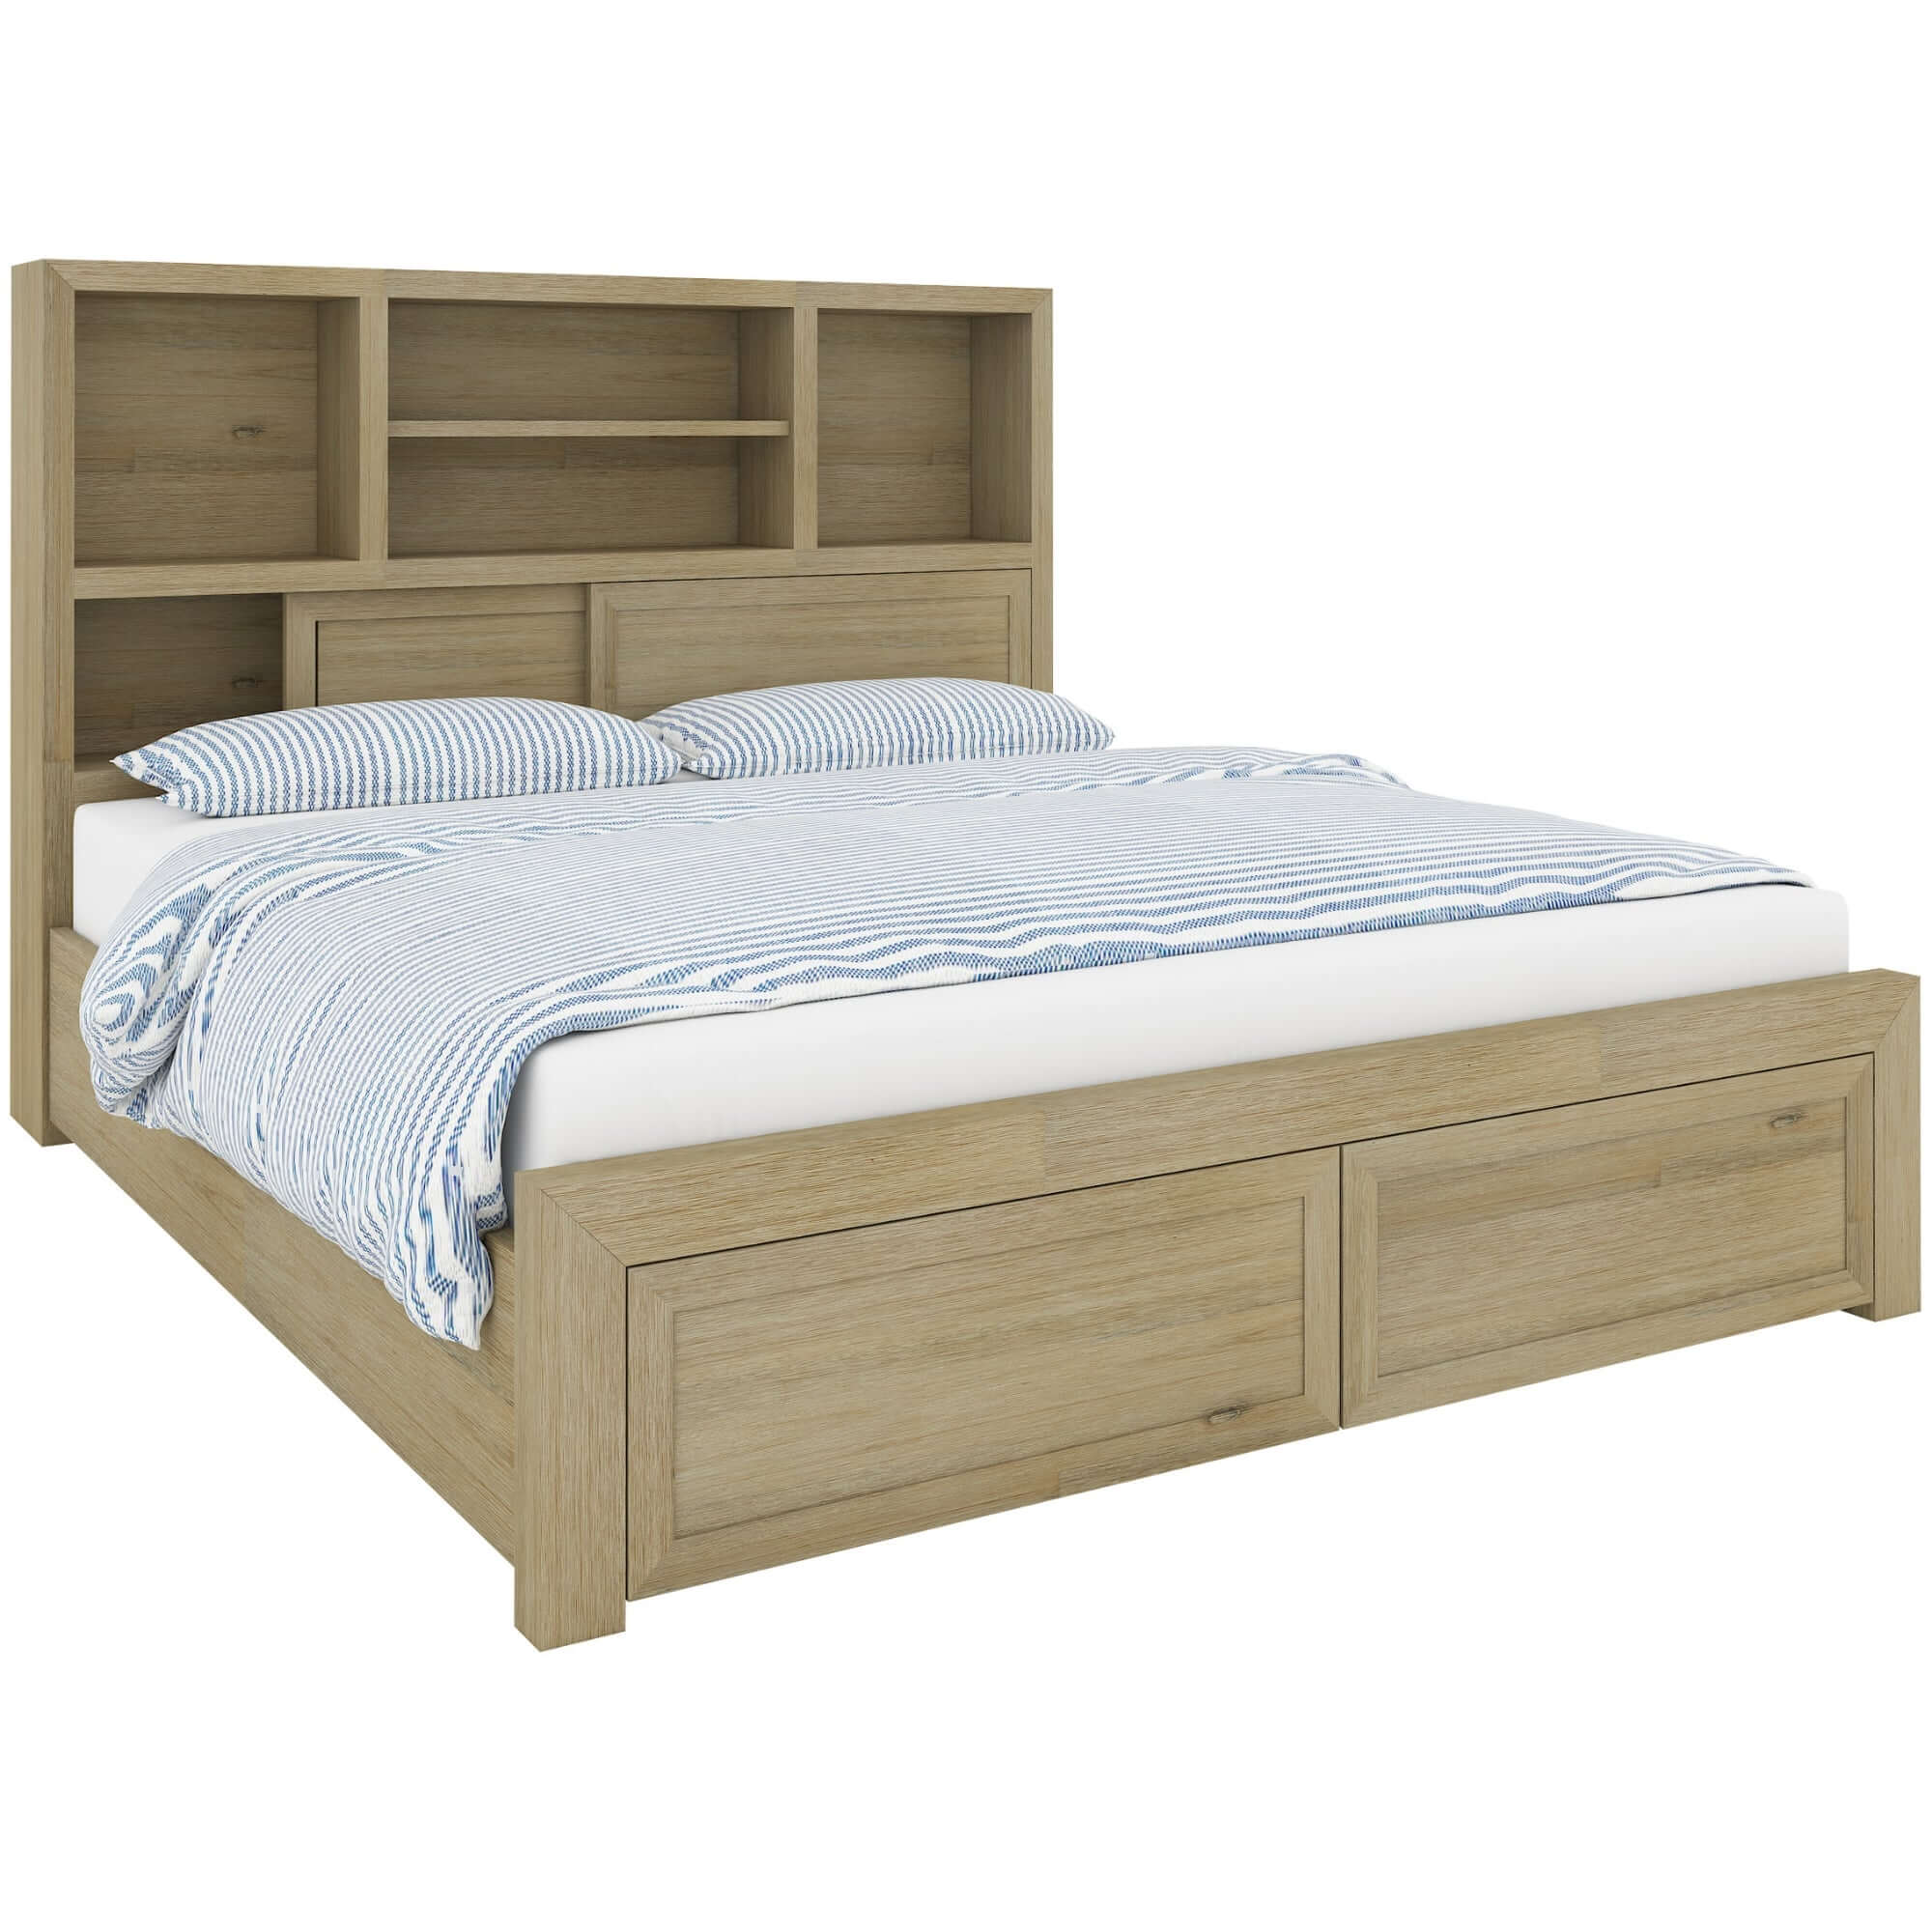 Gracelyn Queen Bed Frame Solid Wood Mattress Base With Storage Drawers - Smoke-Upinteriors